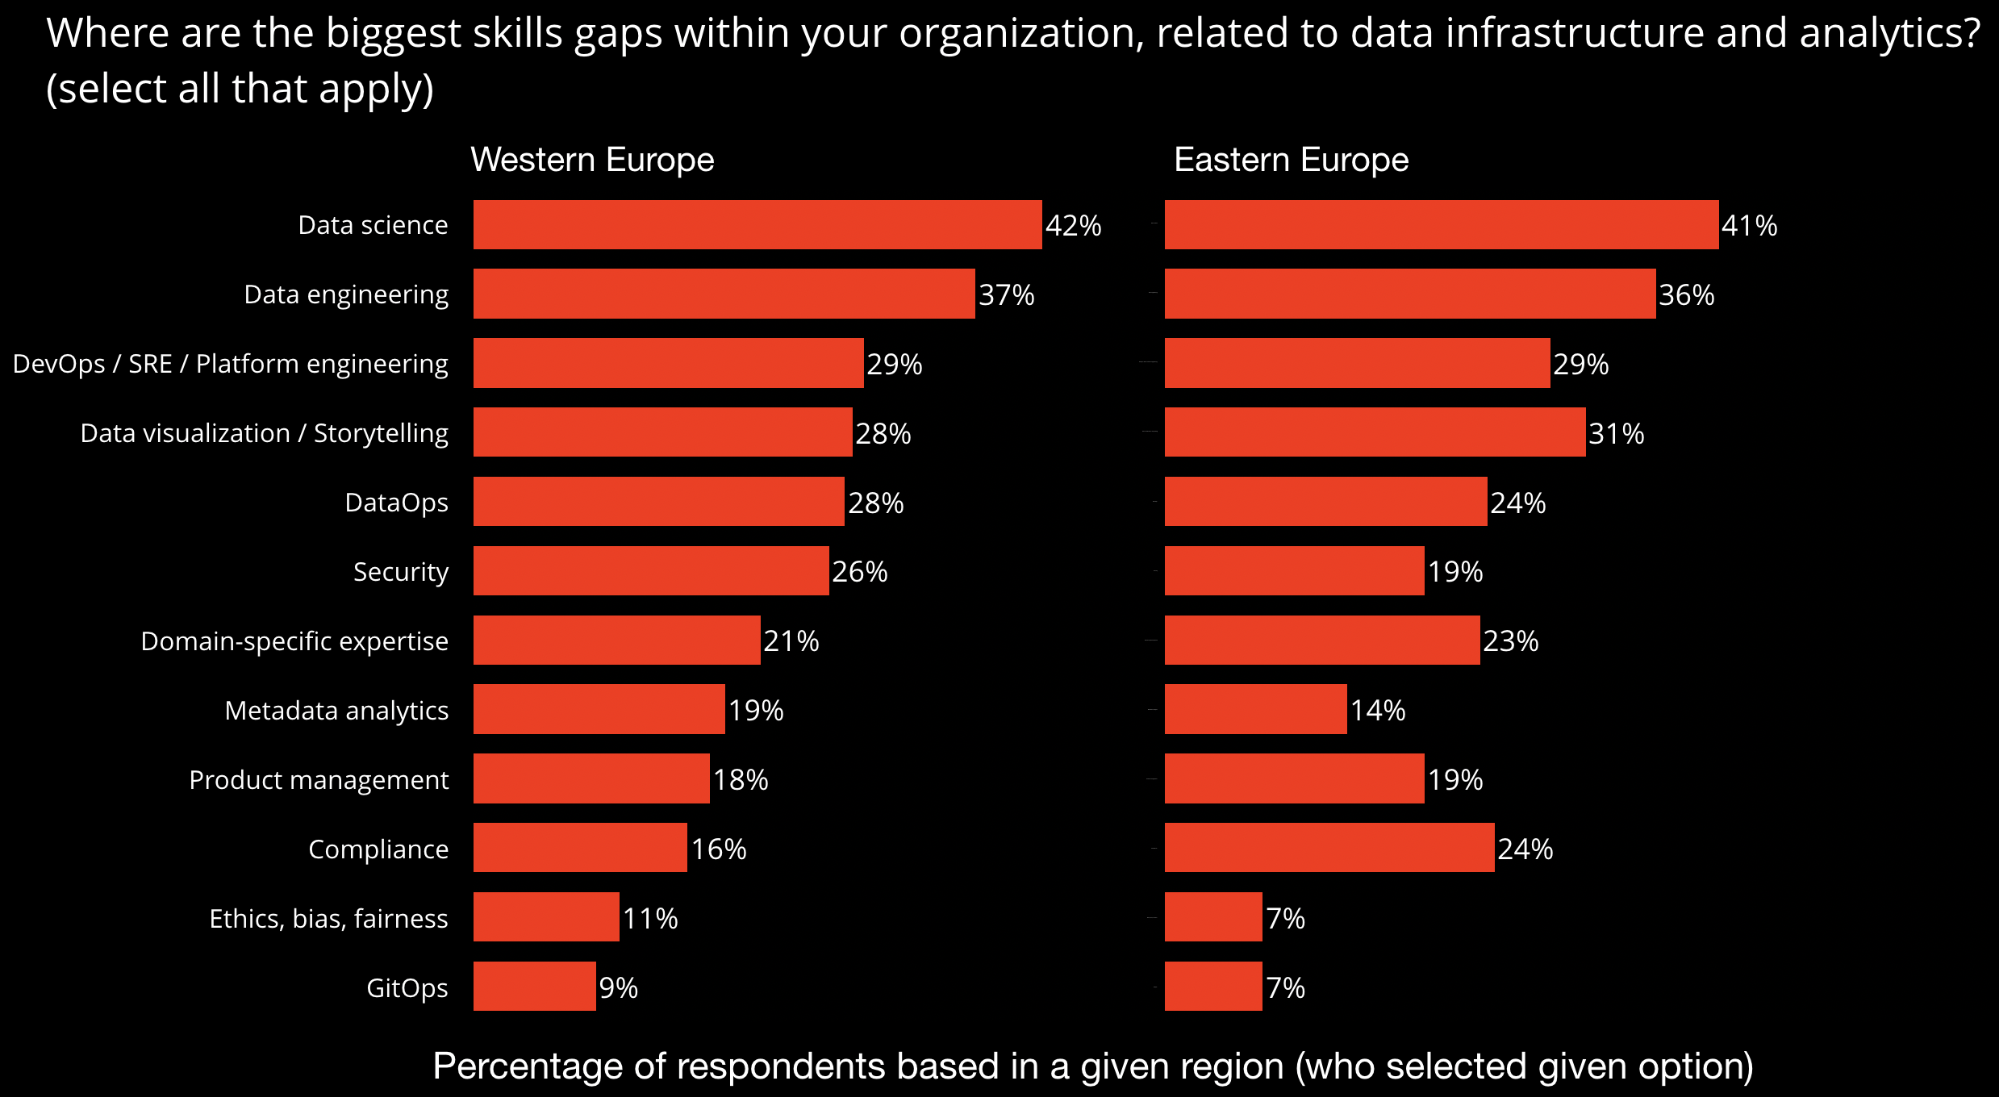 demand for data-related skills in Europe